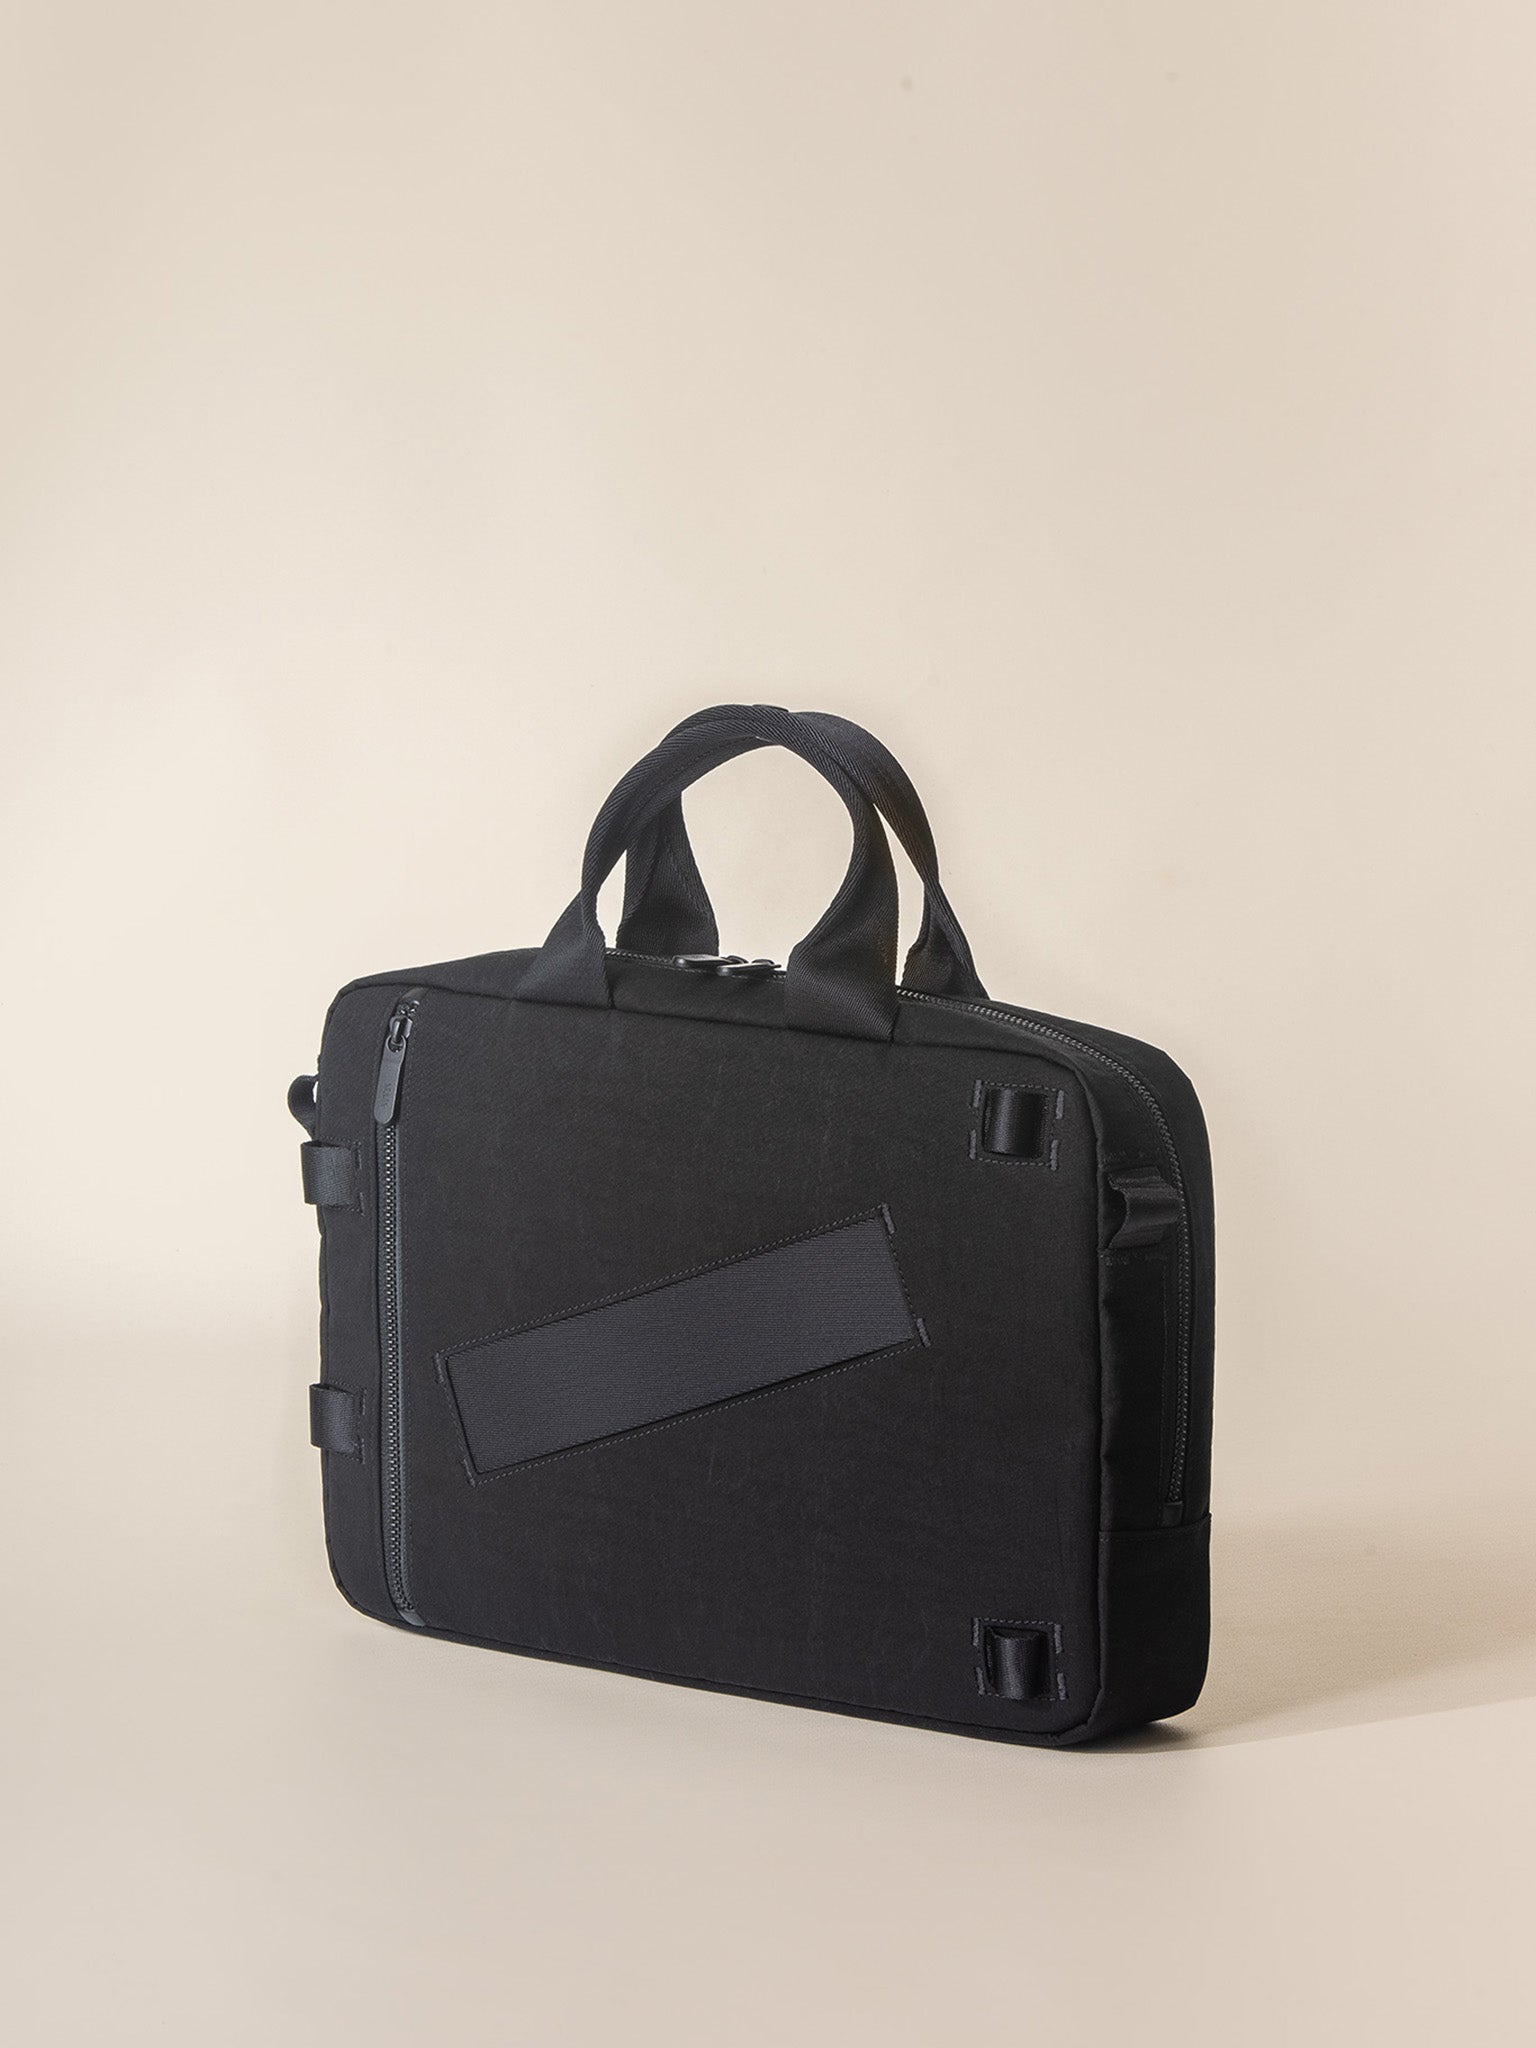 A sleek black briefcase for men with multiple compartments for organizing documents and other essentials